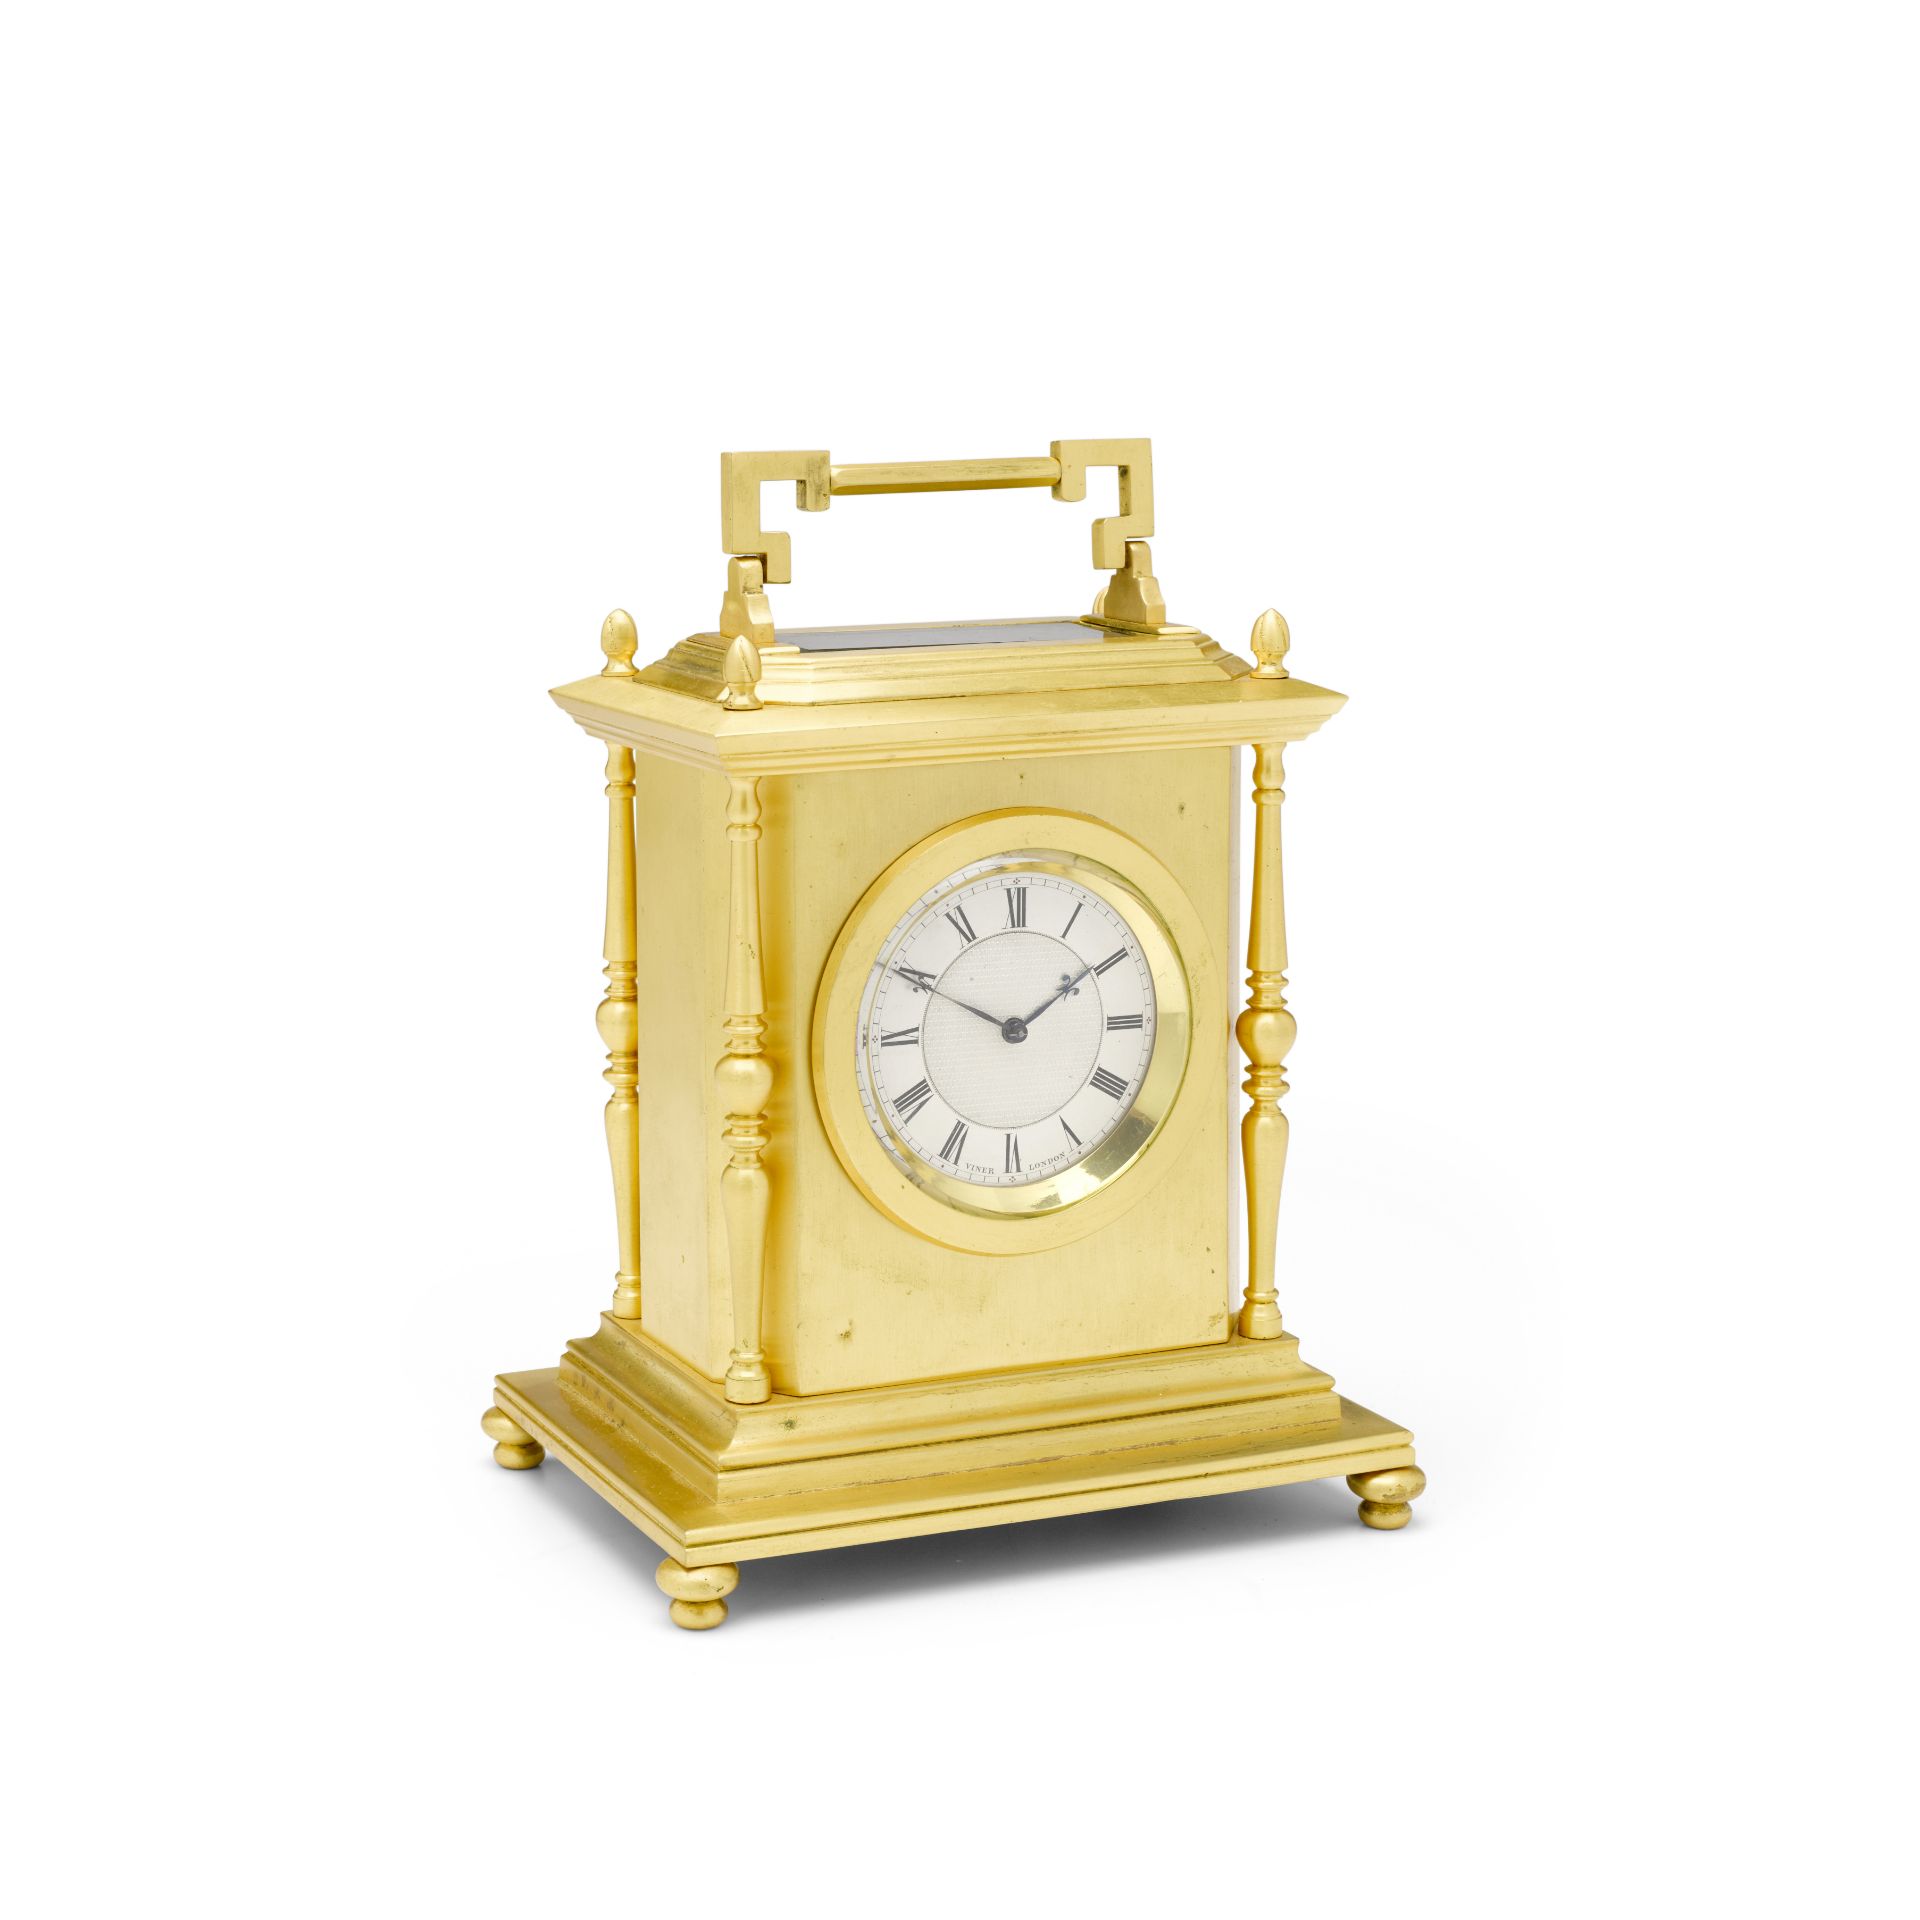 A mid 19th century gilt brass carriage timepiece signed Viner, London